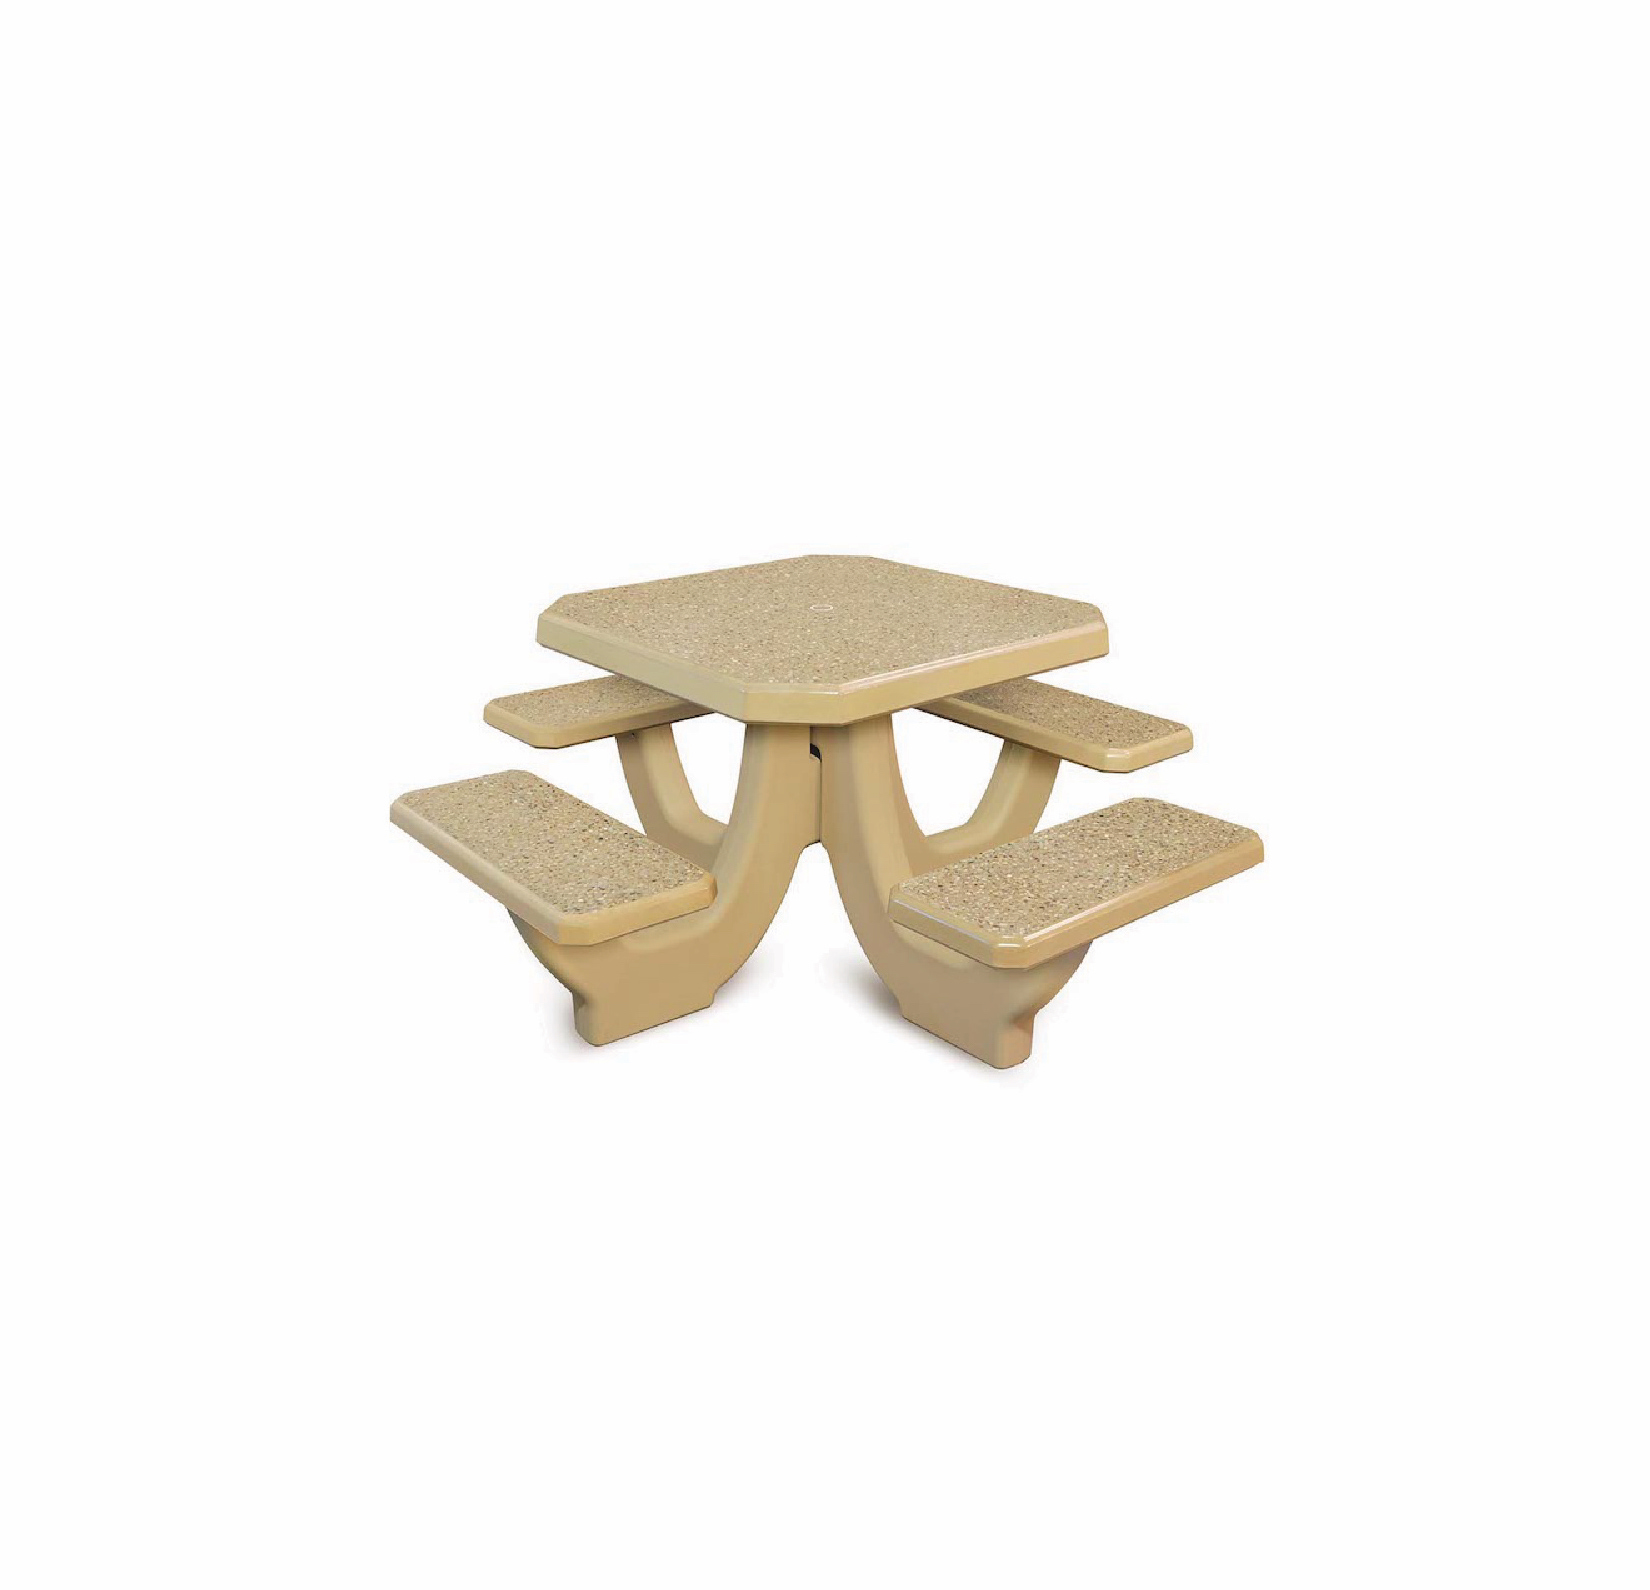 Product Image - Tables